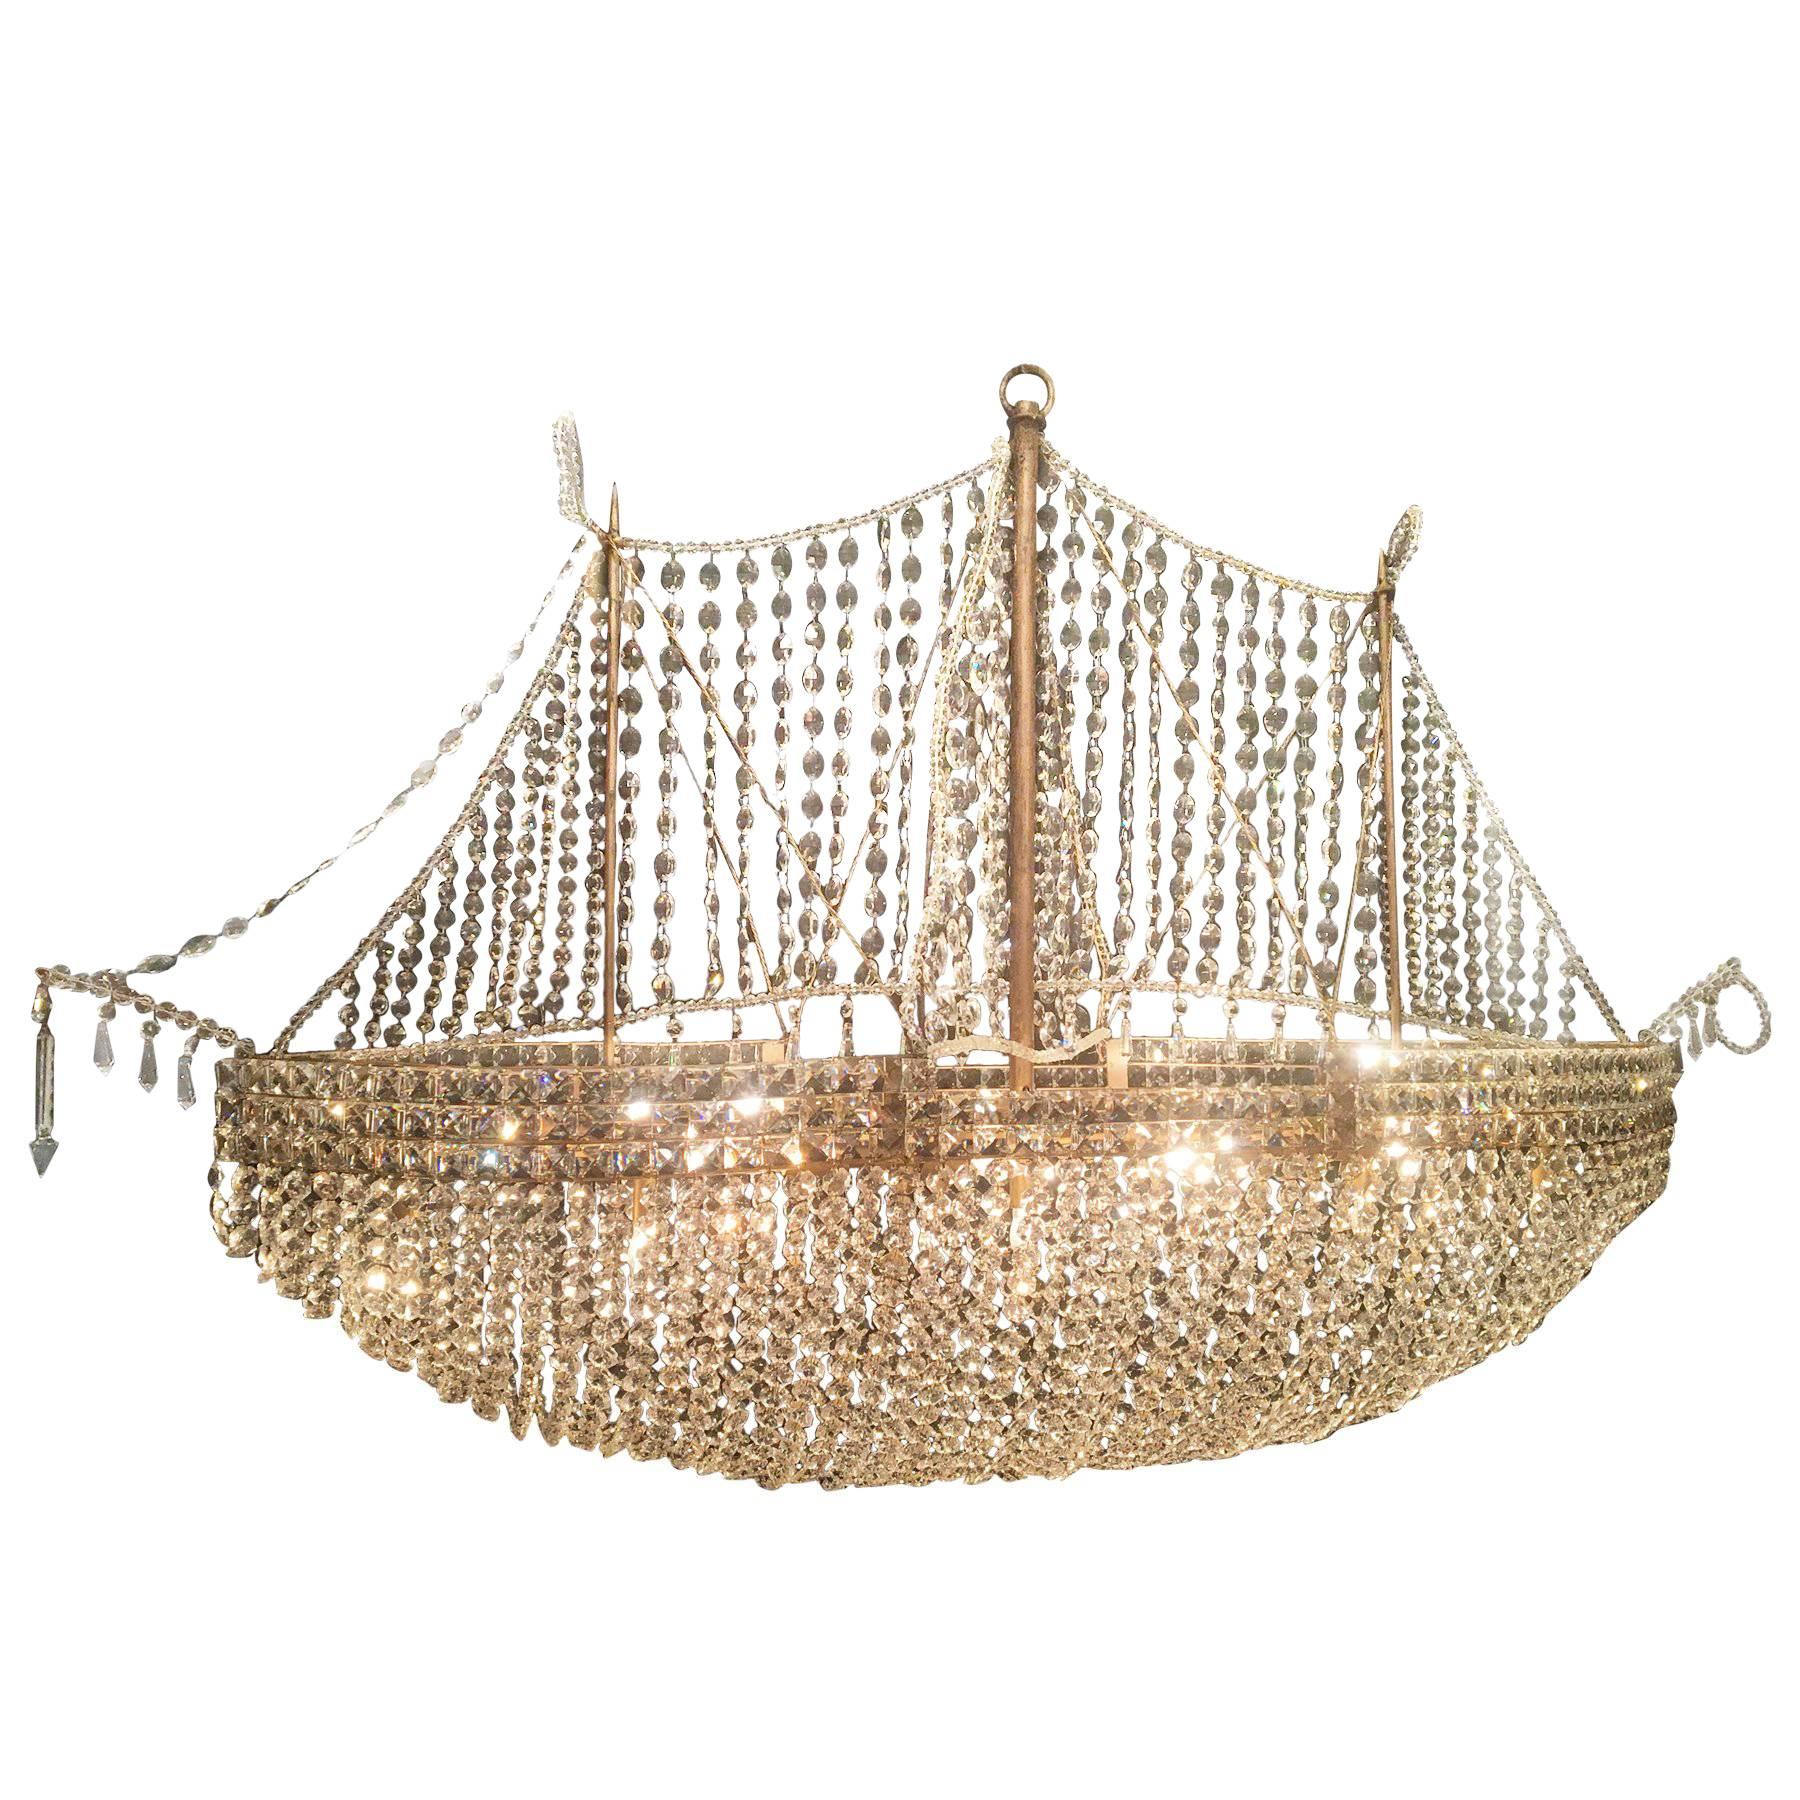 20th Century French Crystal Ship Chandelier